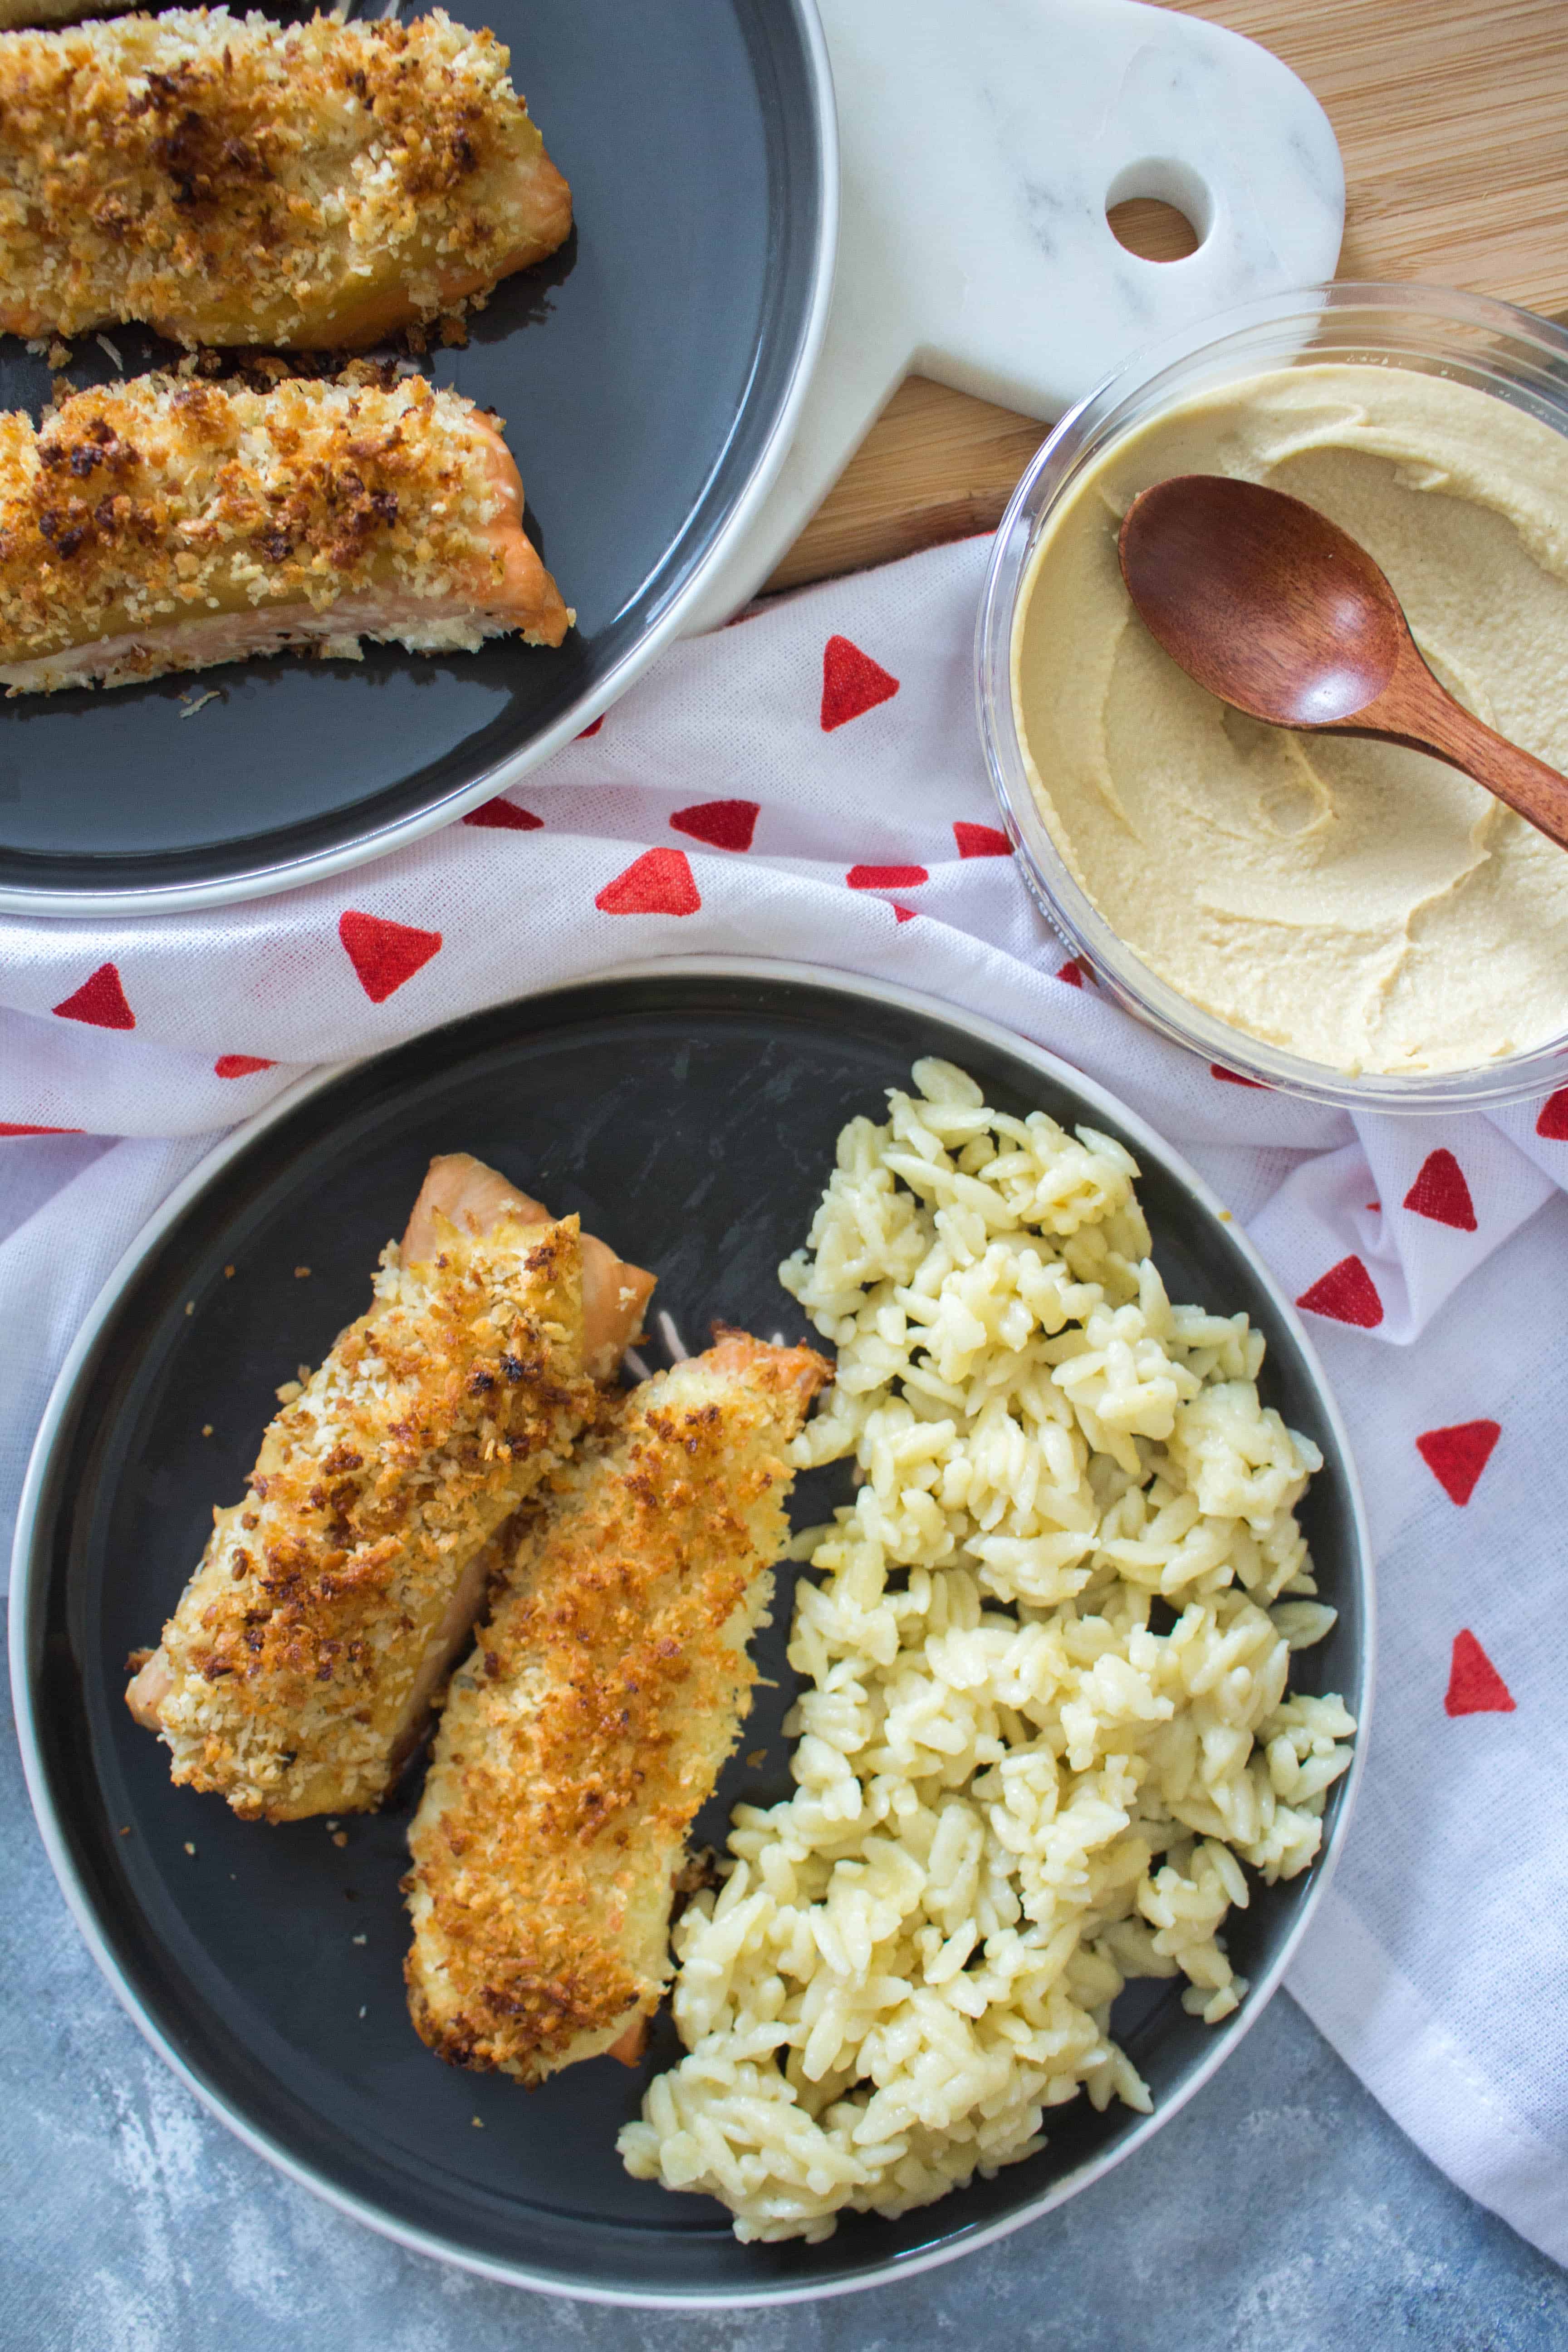 This delicious Hummus Crusted Salmon with Panko is baked to perfection! This Hummus Crusted Salmon is perfect for a healthy weeknight dinner and lunch meal prep with the leftovers.